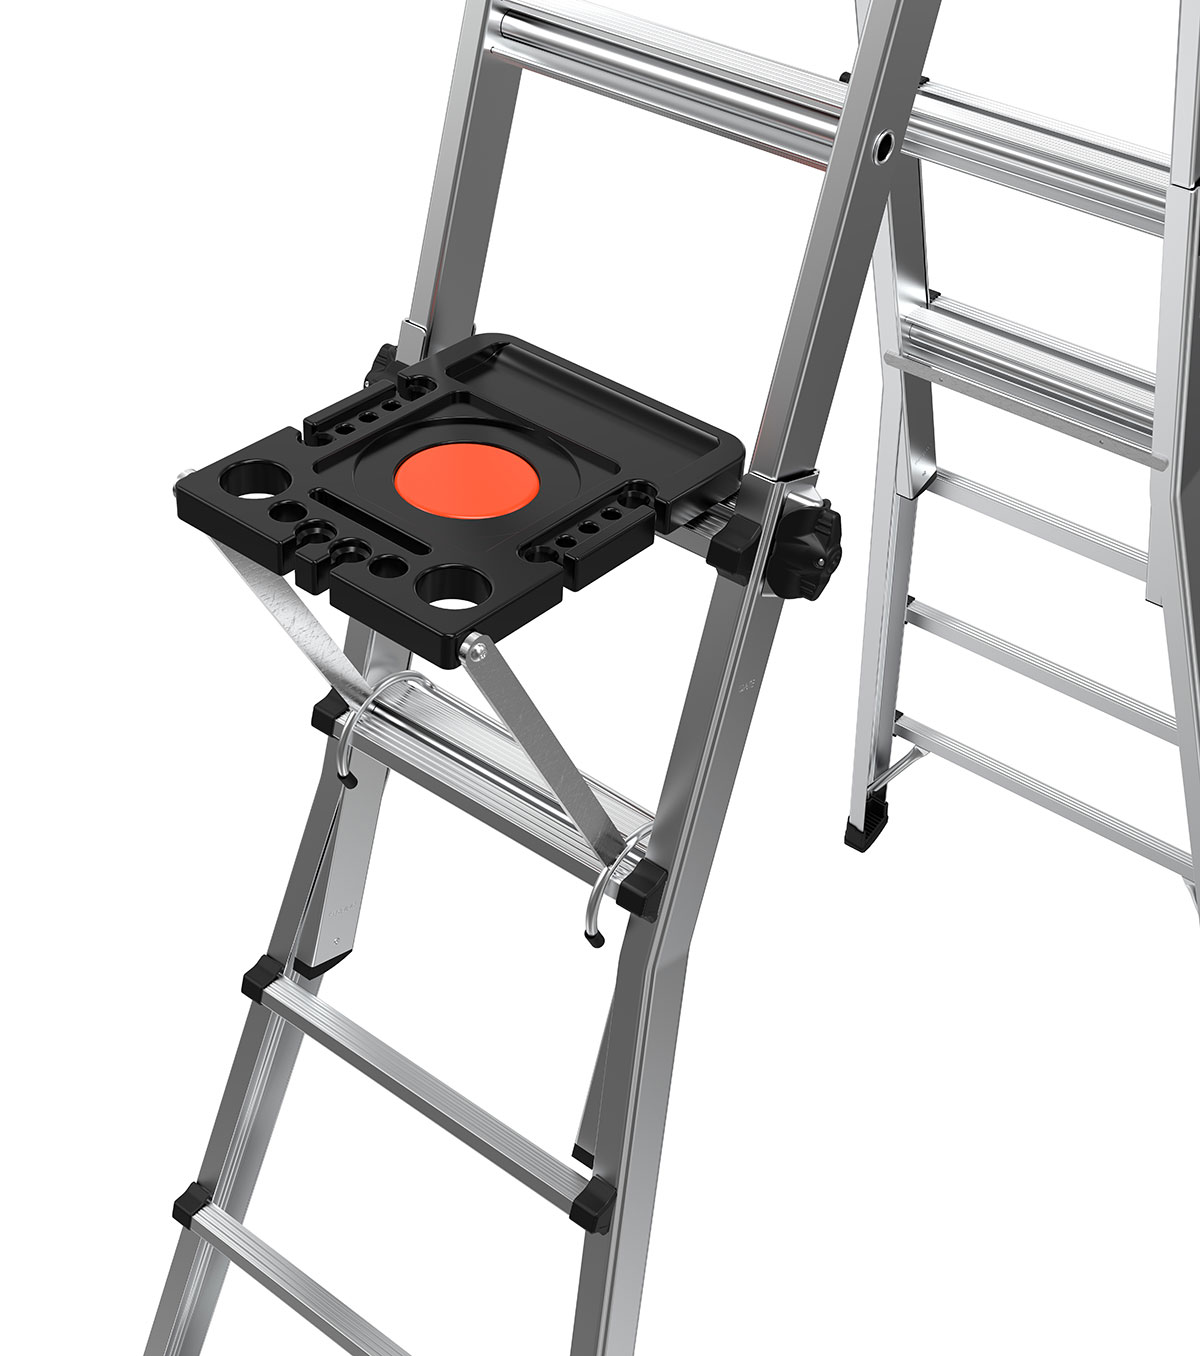 How to Take Paint Thing off Little Giant Ladder 